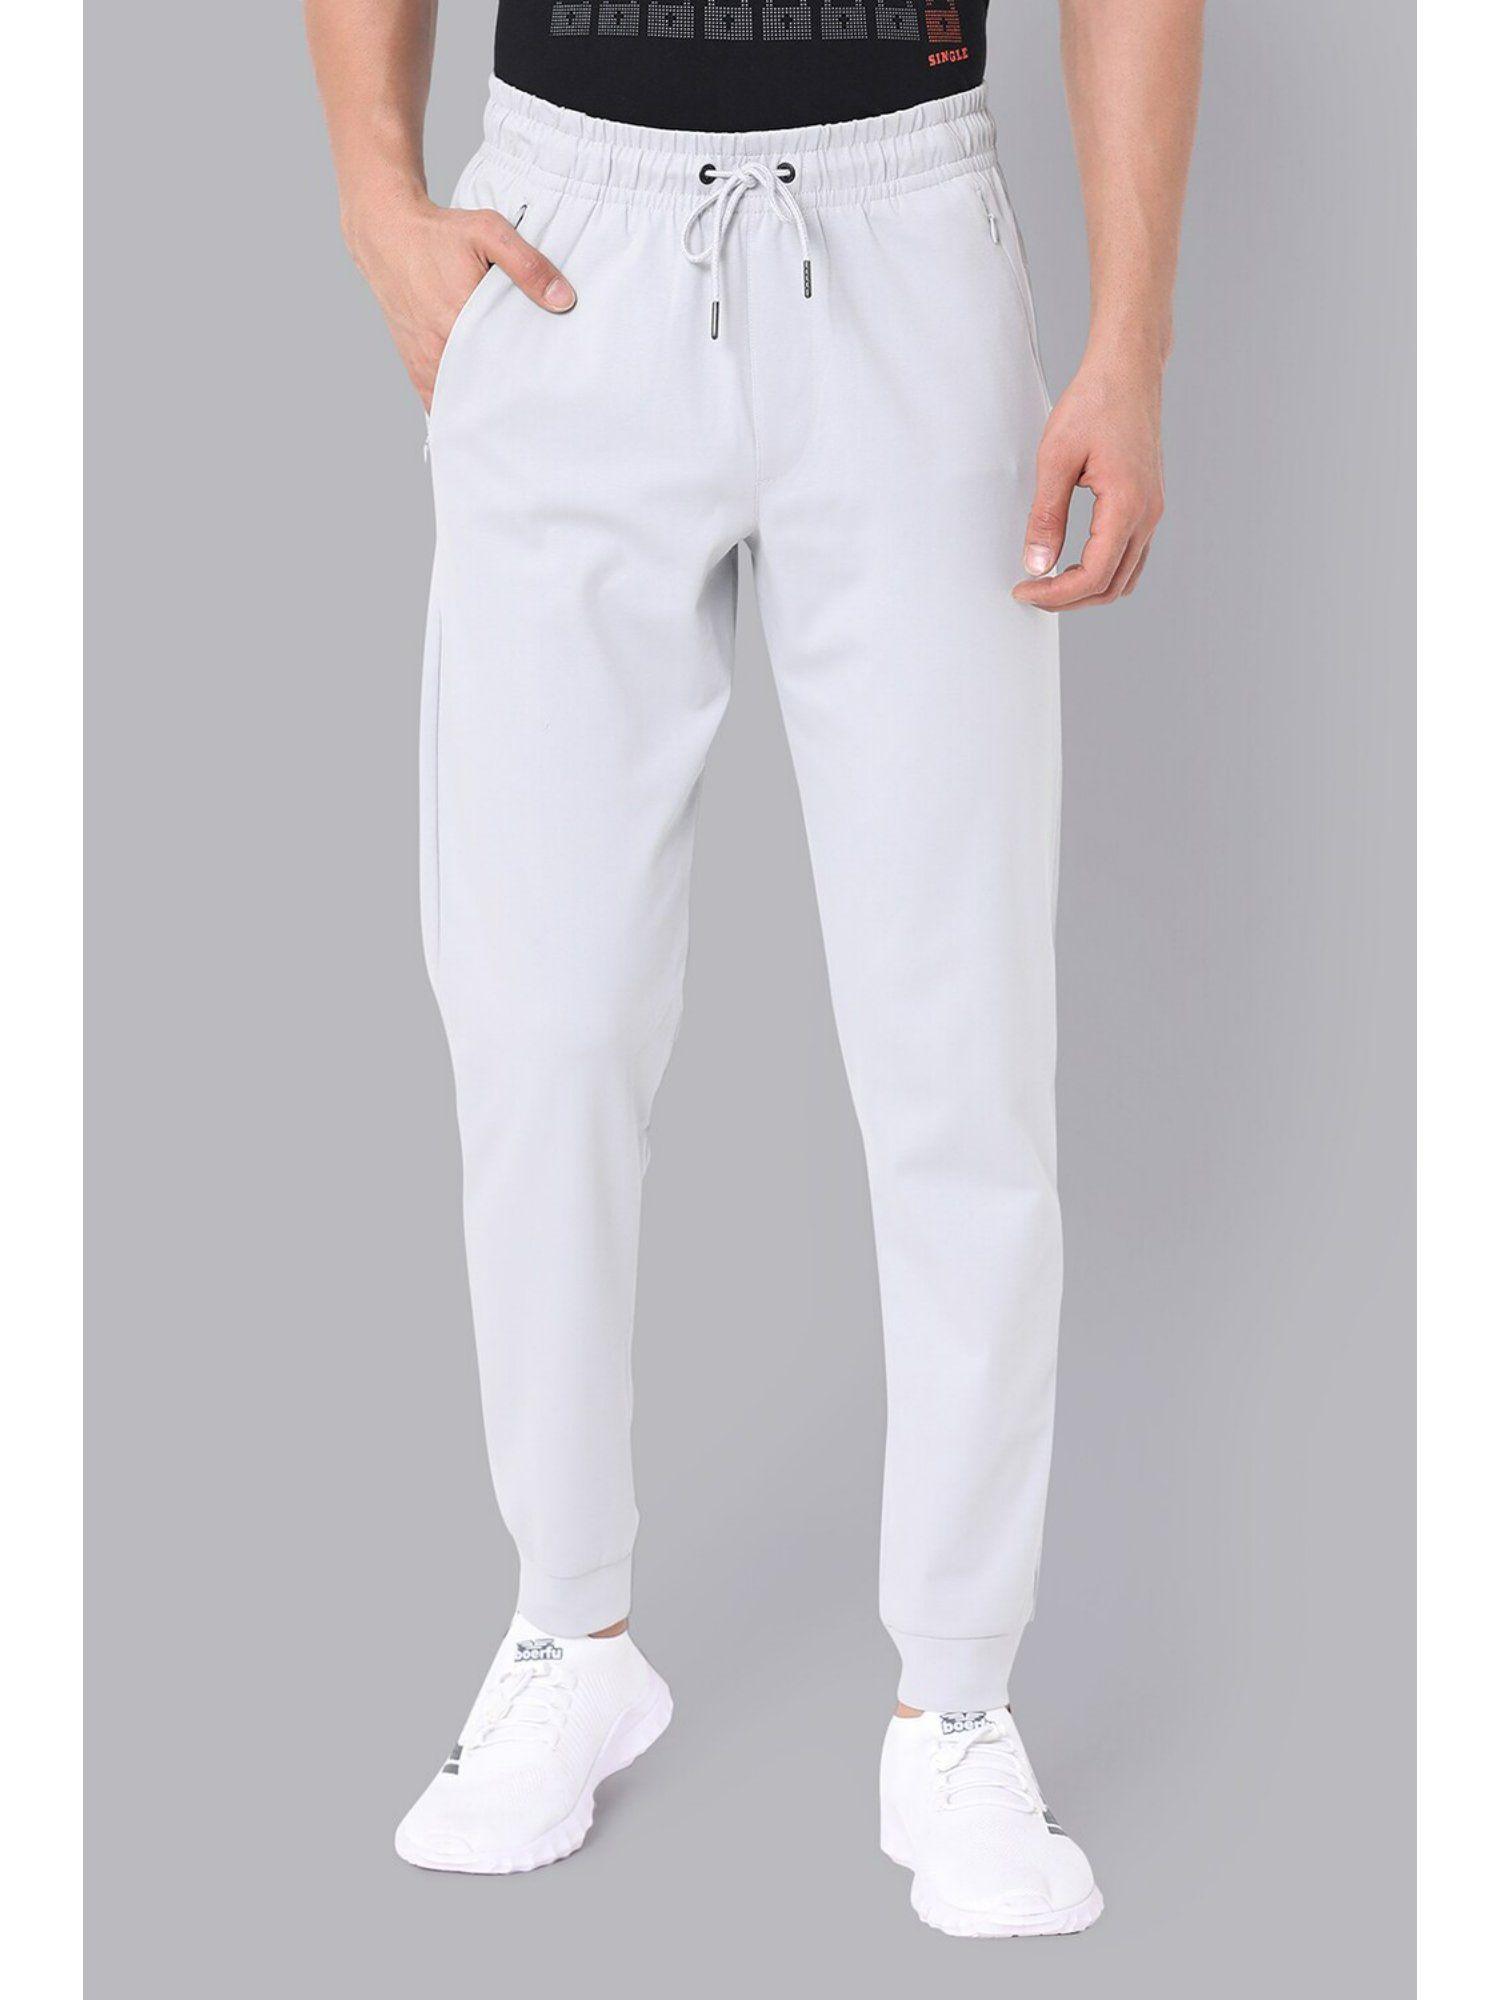 men white solid casual jogger pants